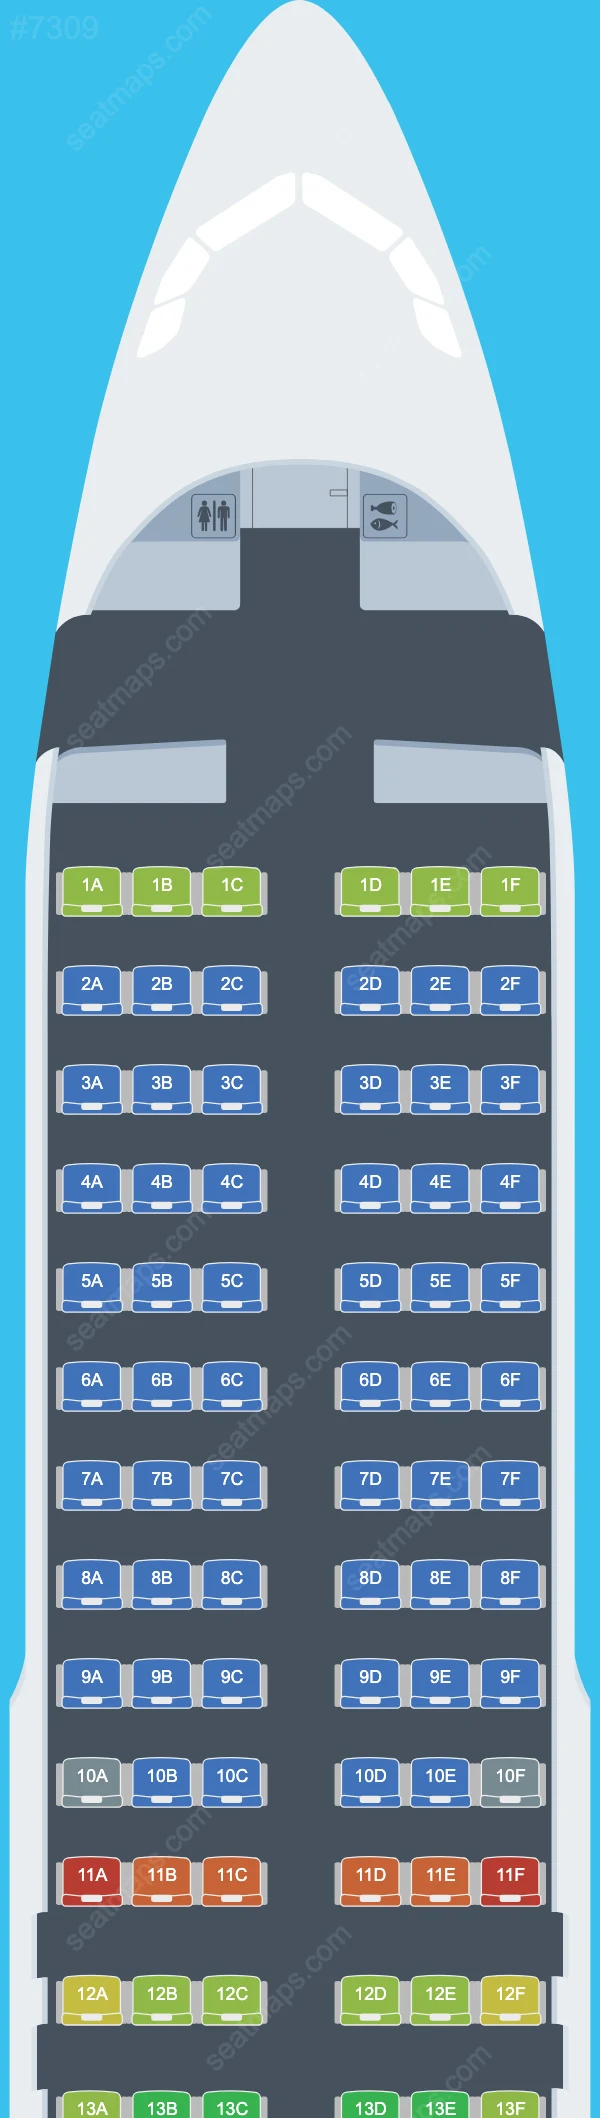 Go First Airbus A320 Seat Maps A320-200